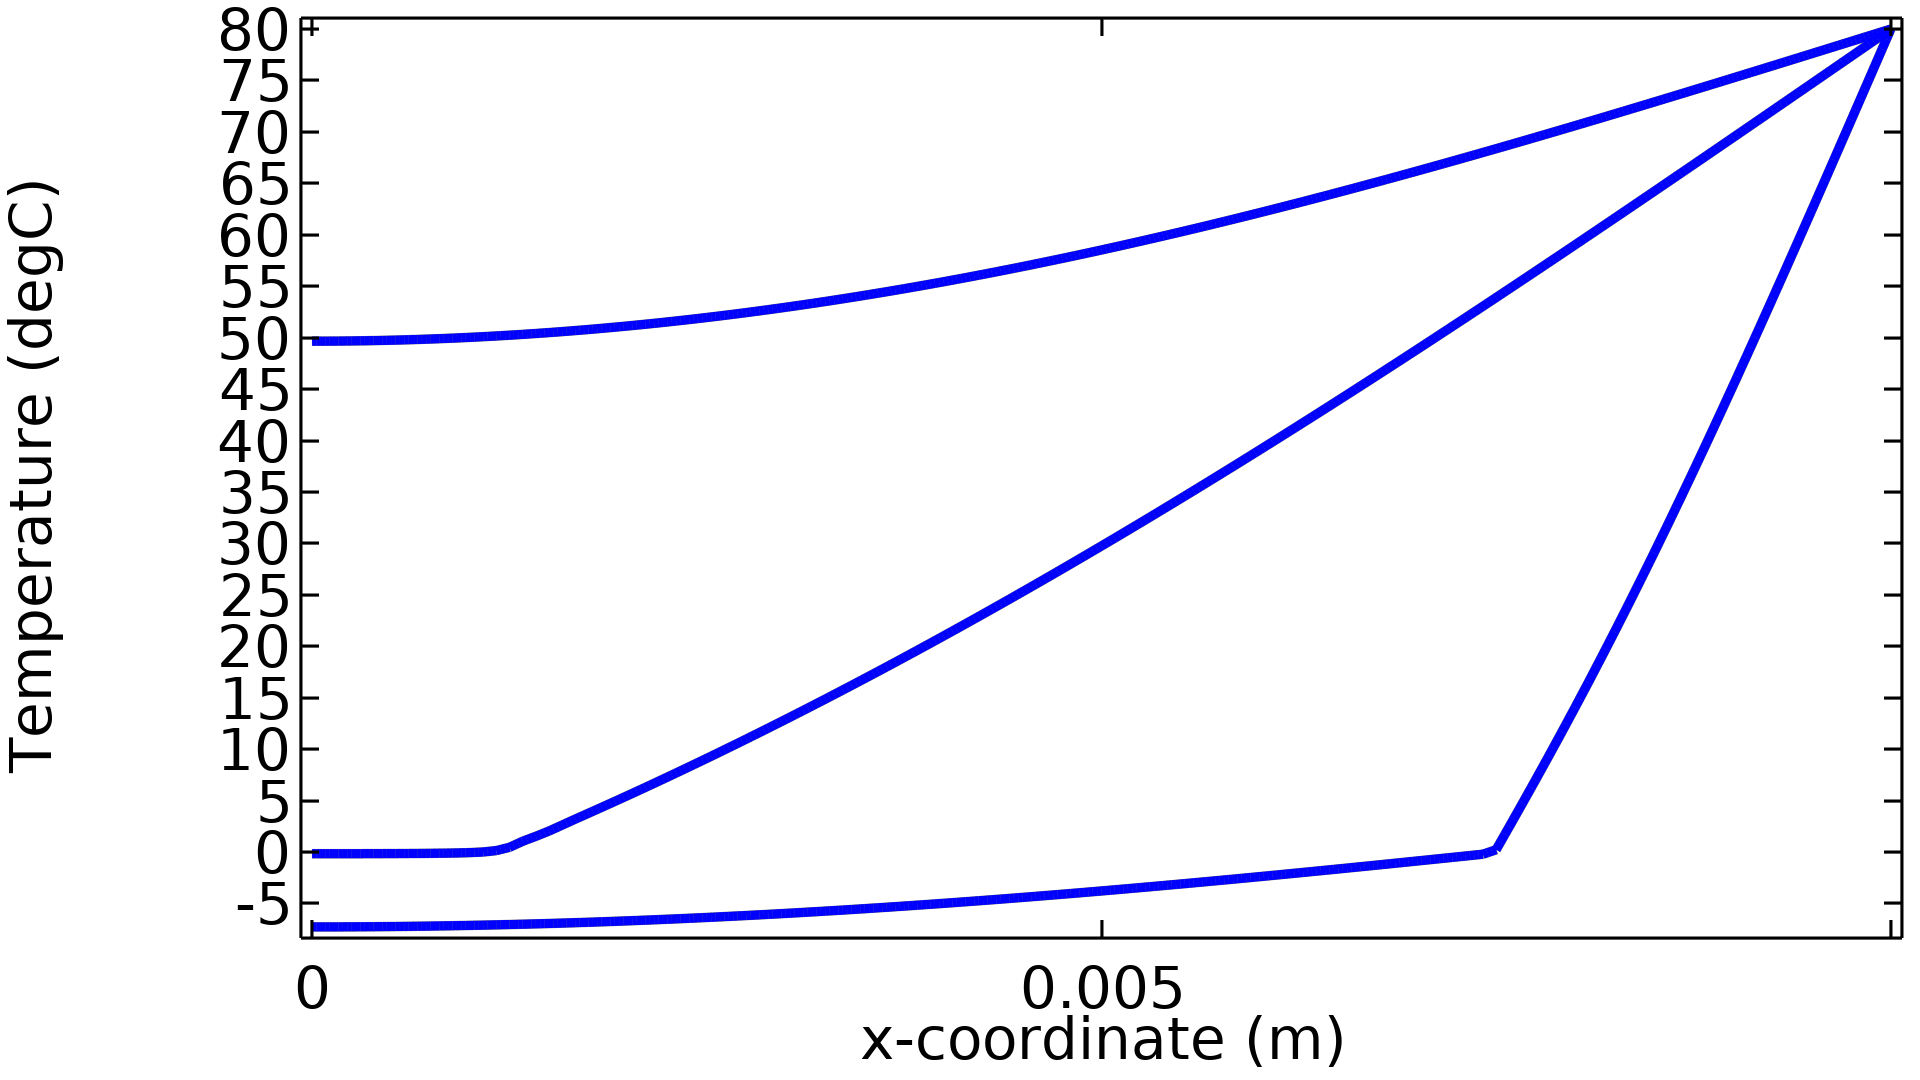 A 1D plot with three solid lines and temperature on the y-axis.